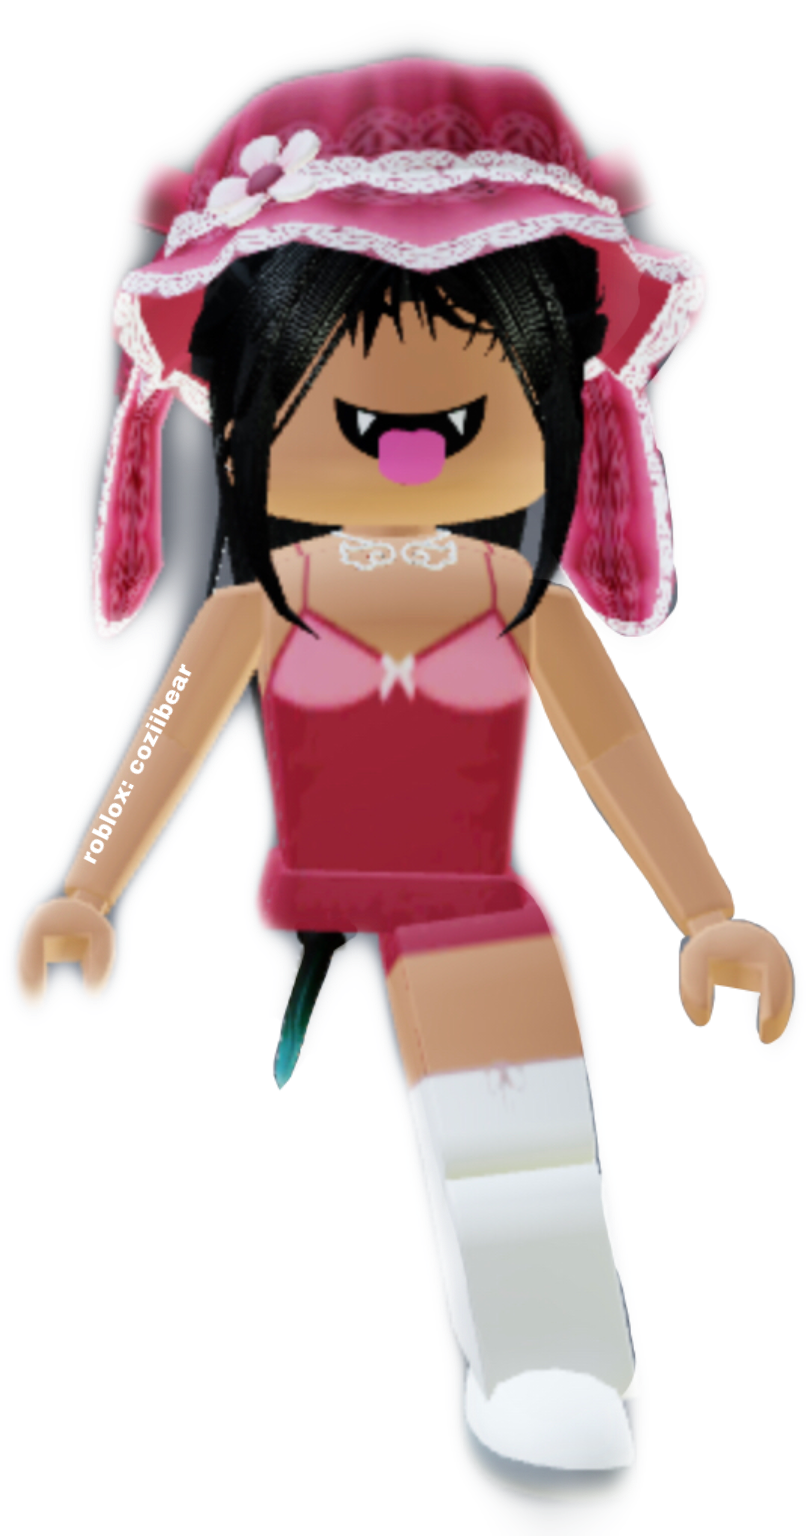 The Most Edited Cnp Picsart - roblox girl png cnp